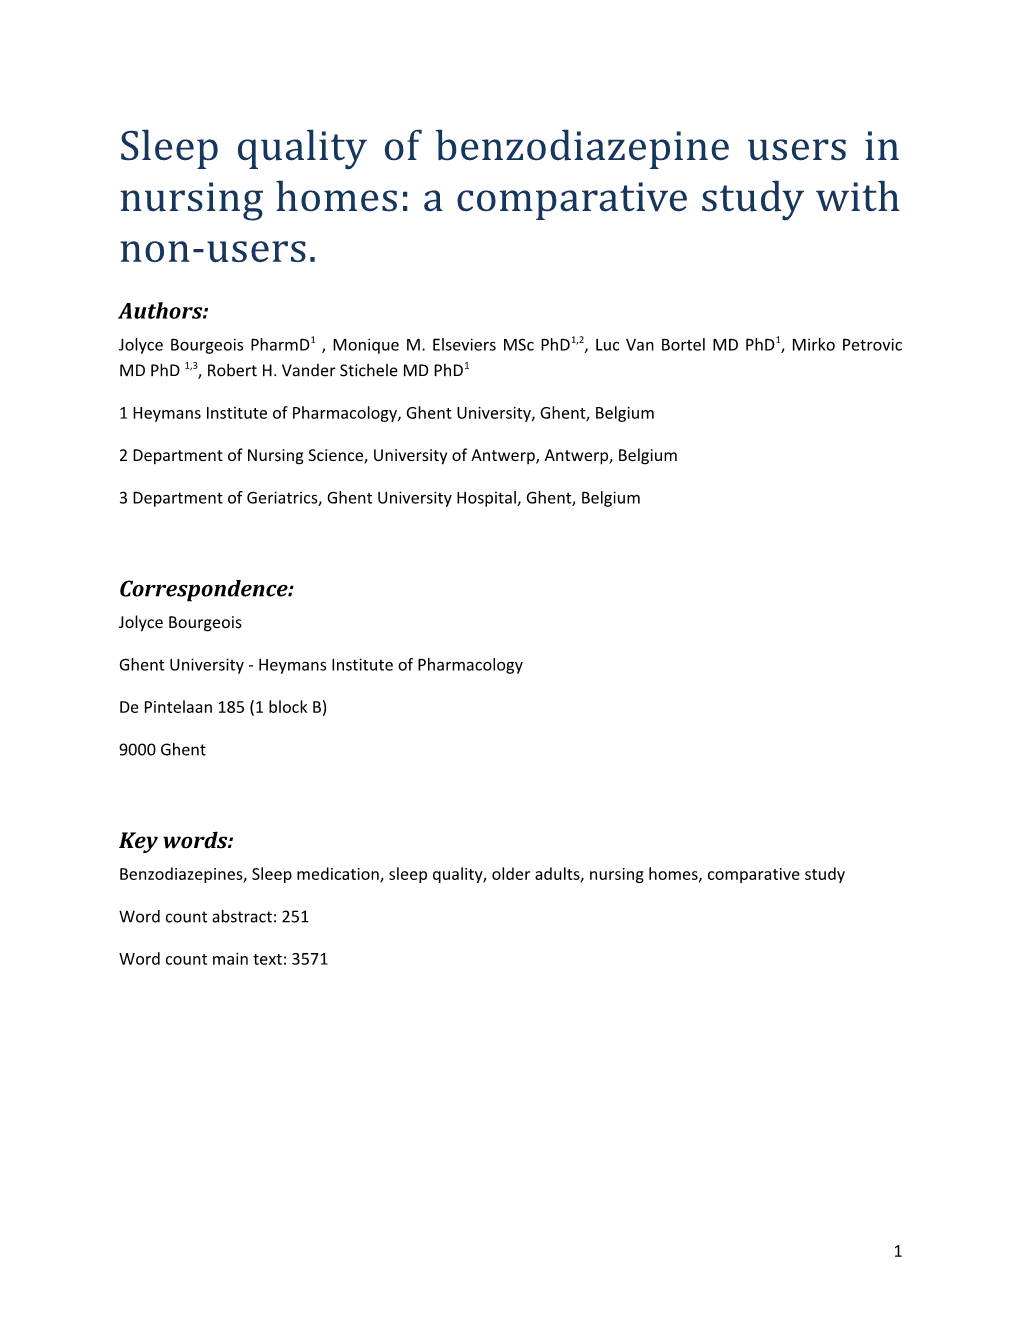 Sleep Quality of Benzodiazepine Users in Nursing Homes: a Comparative Study with Non-Users